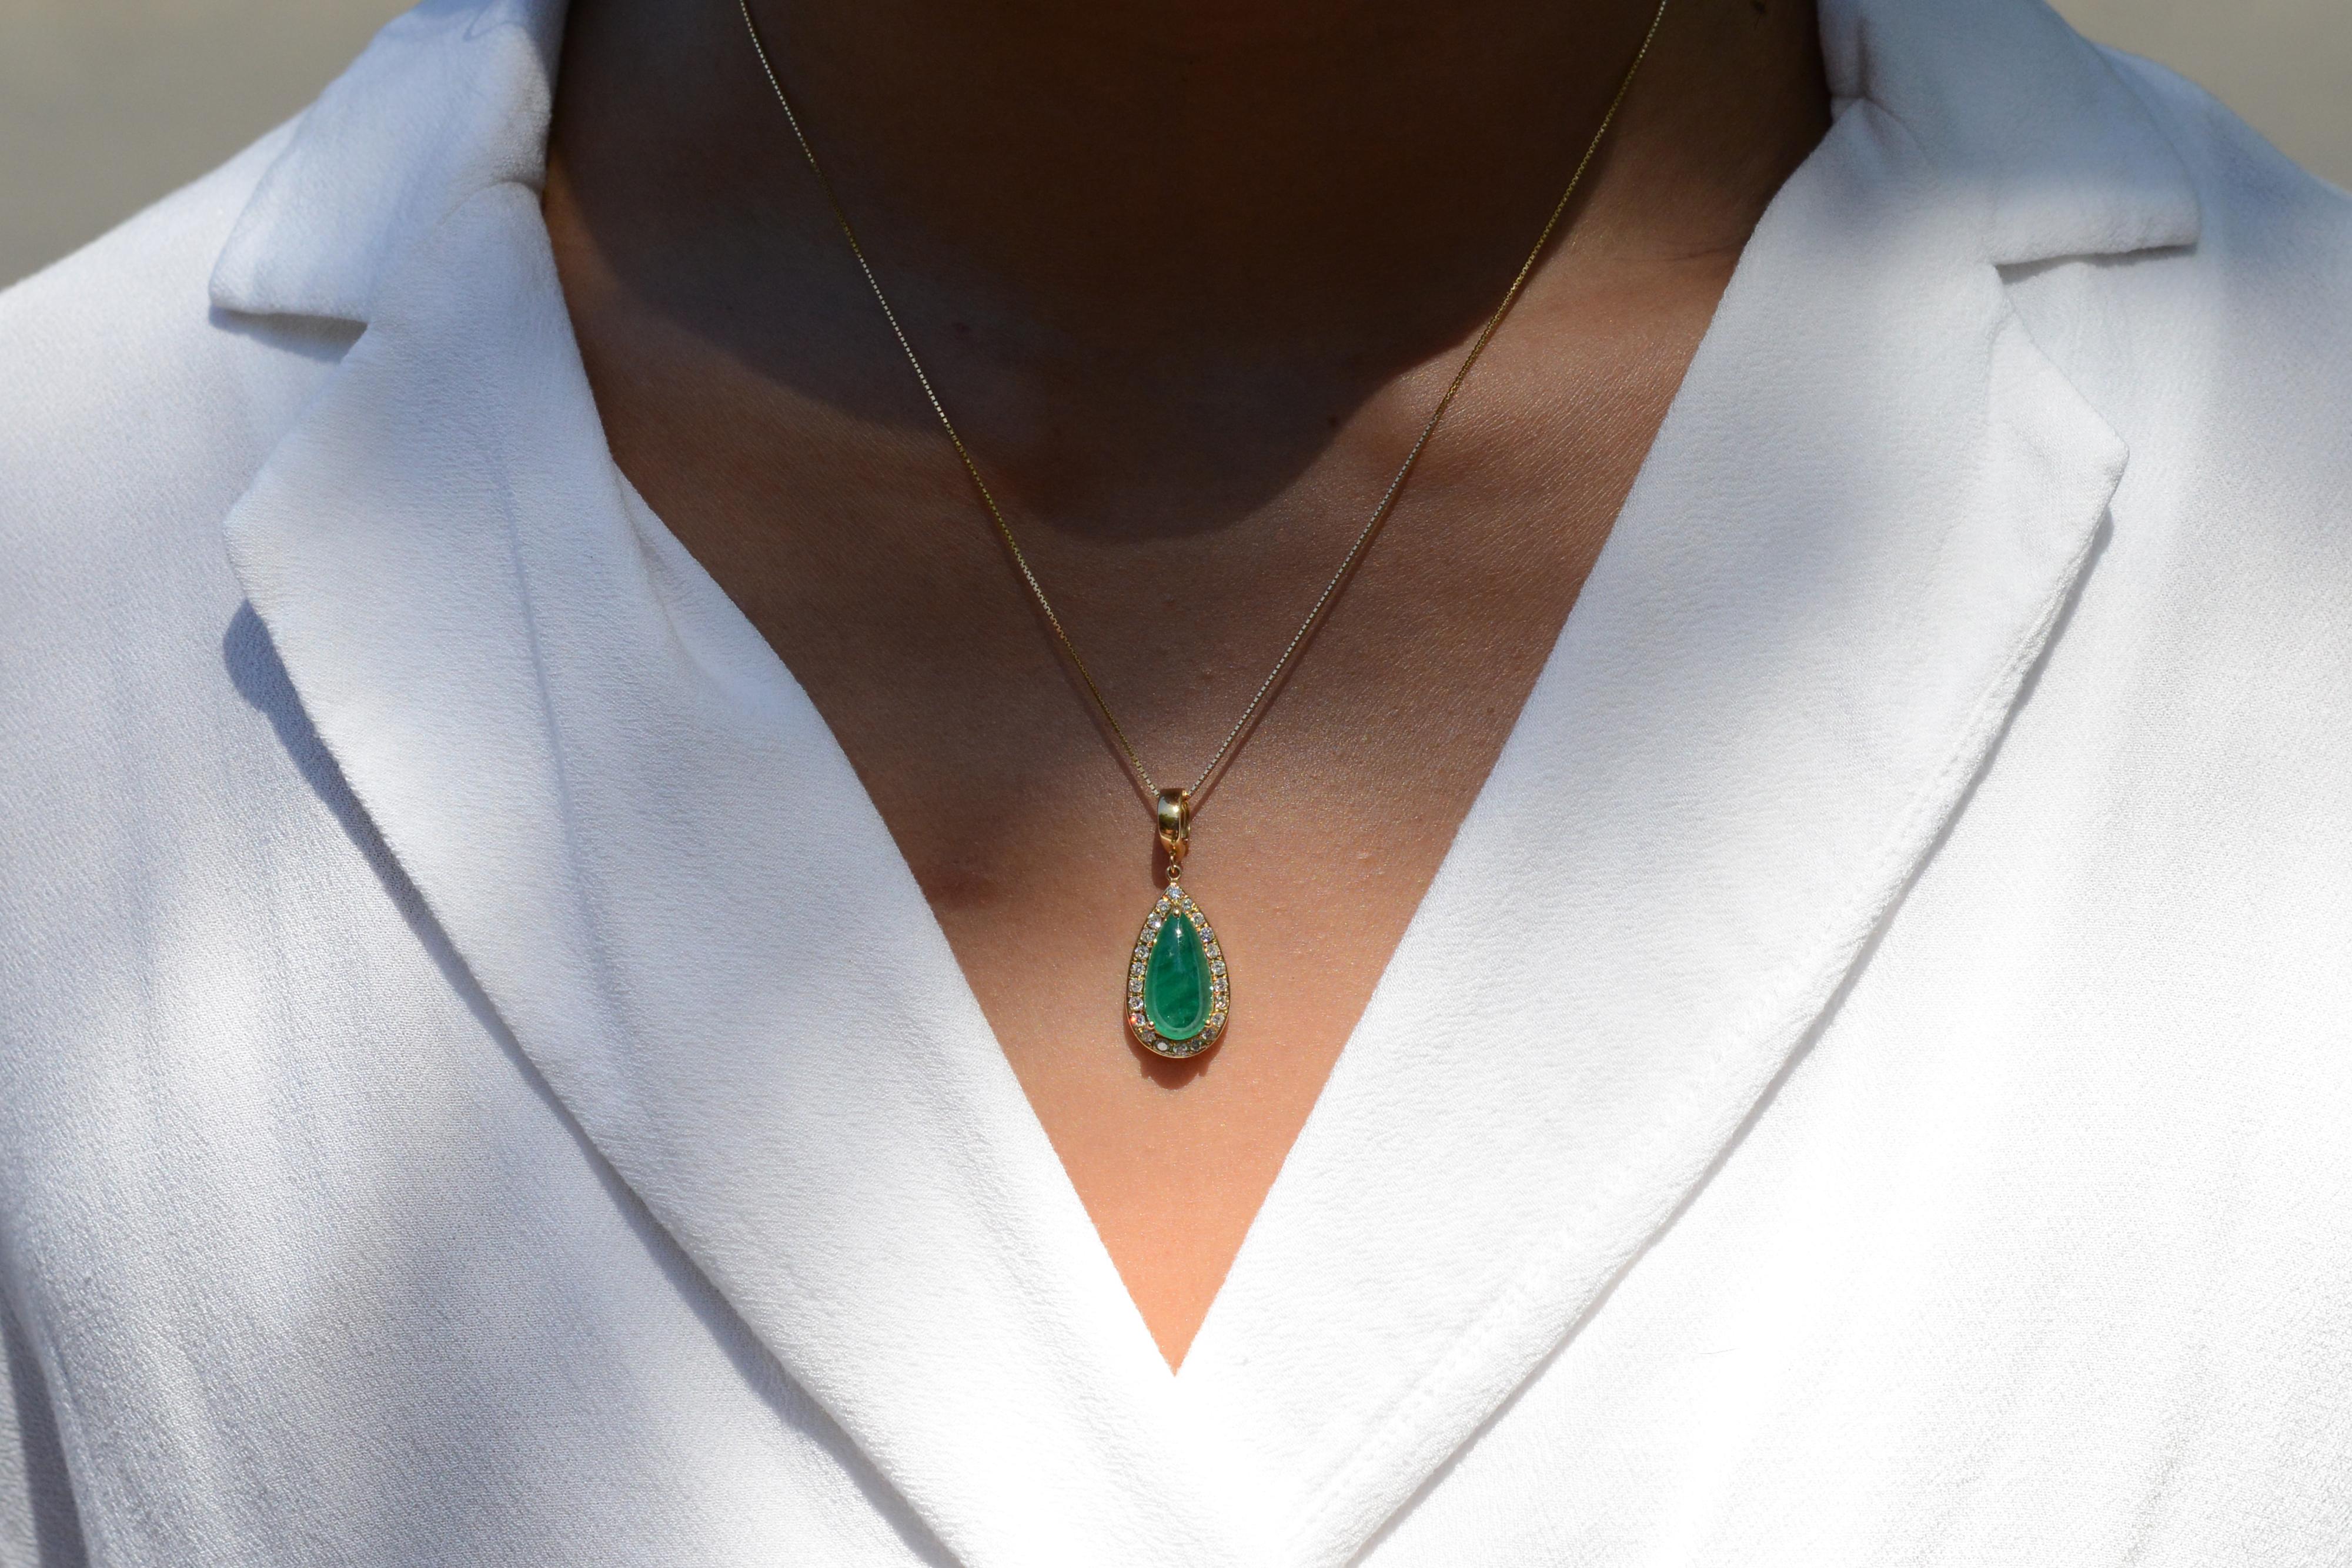 This ravishing necklace features a vibrant green pear shape cabochon emerald in elegant 18k yellow gold. The setting is illuminated with 22 colorless diamonds that beam off your neck. This pendant is a versatile piece with a hinged enhancer bail